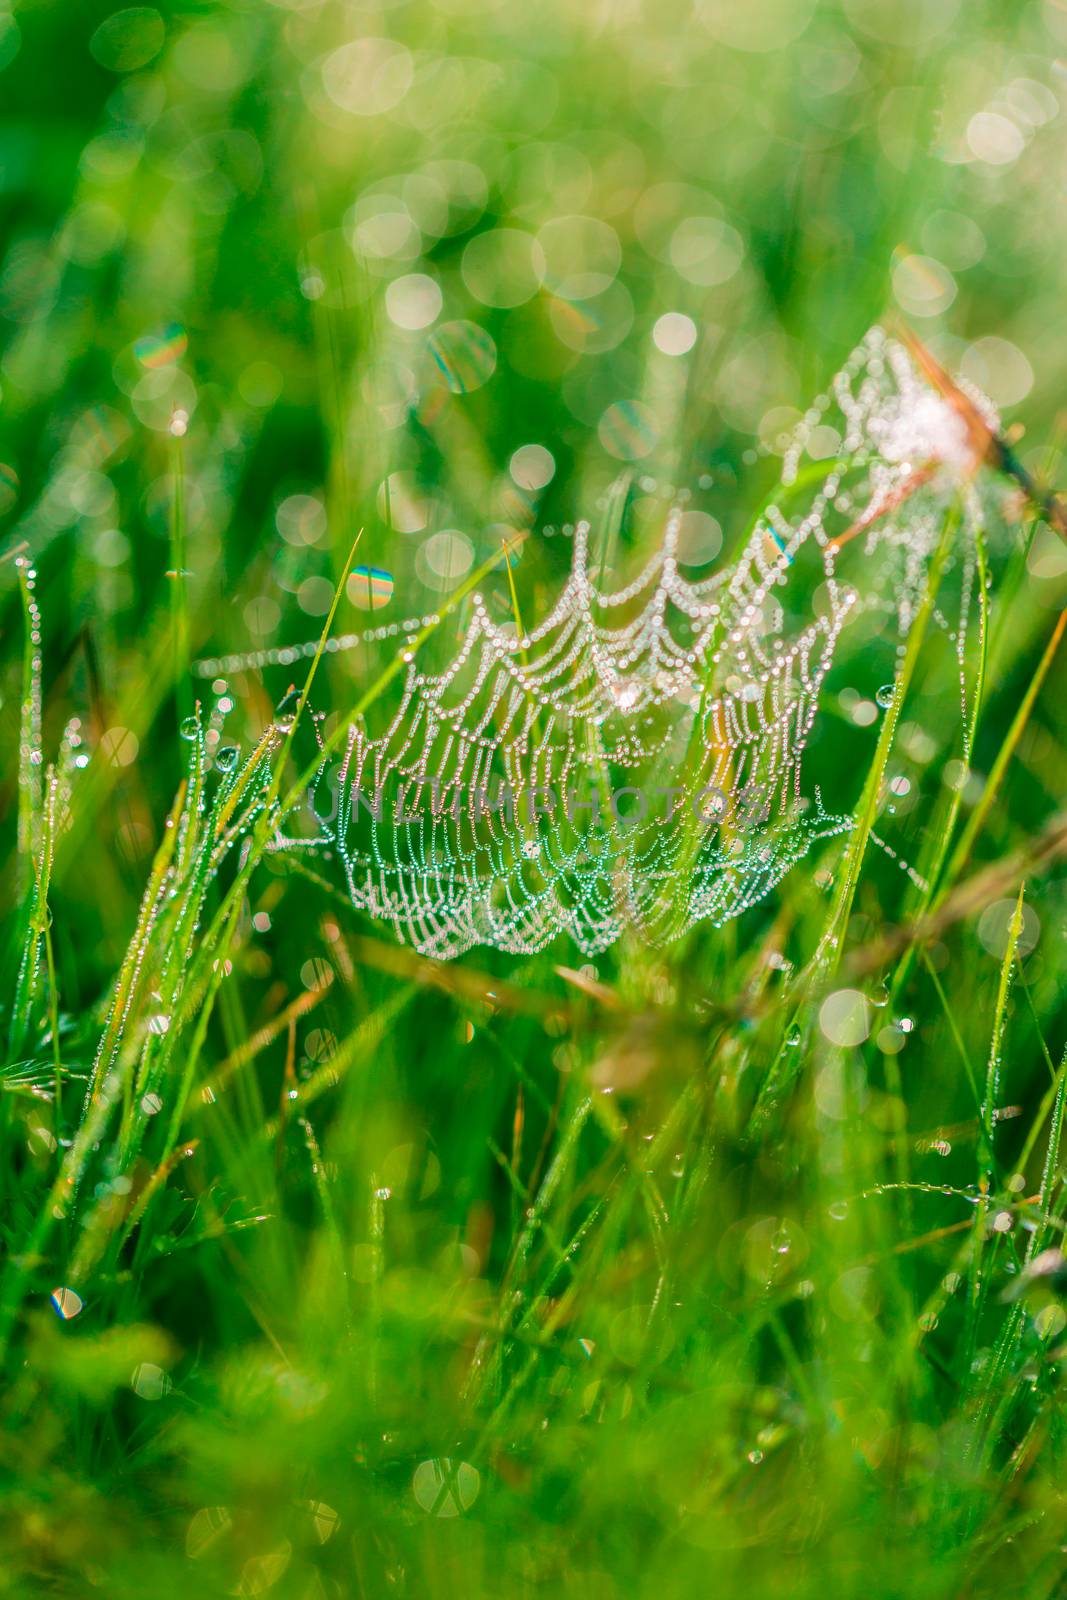 spider web in drops  by MegaArt